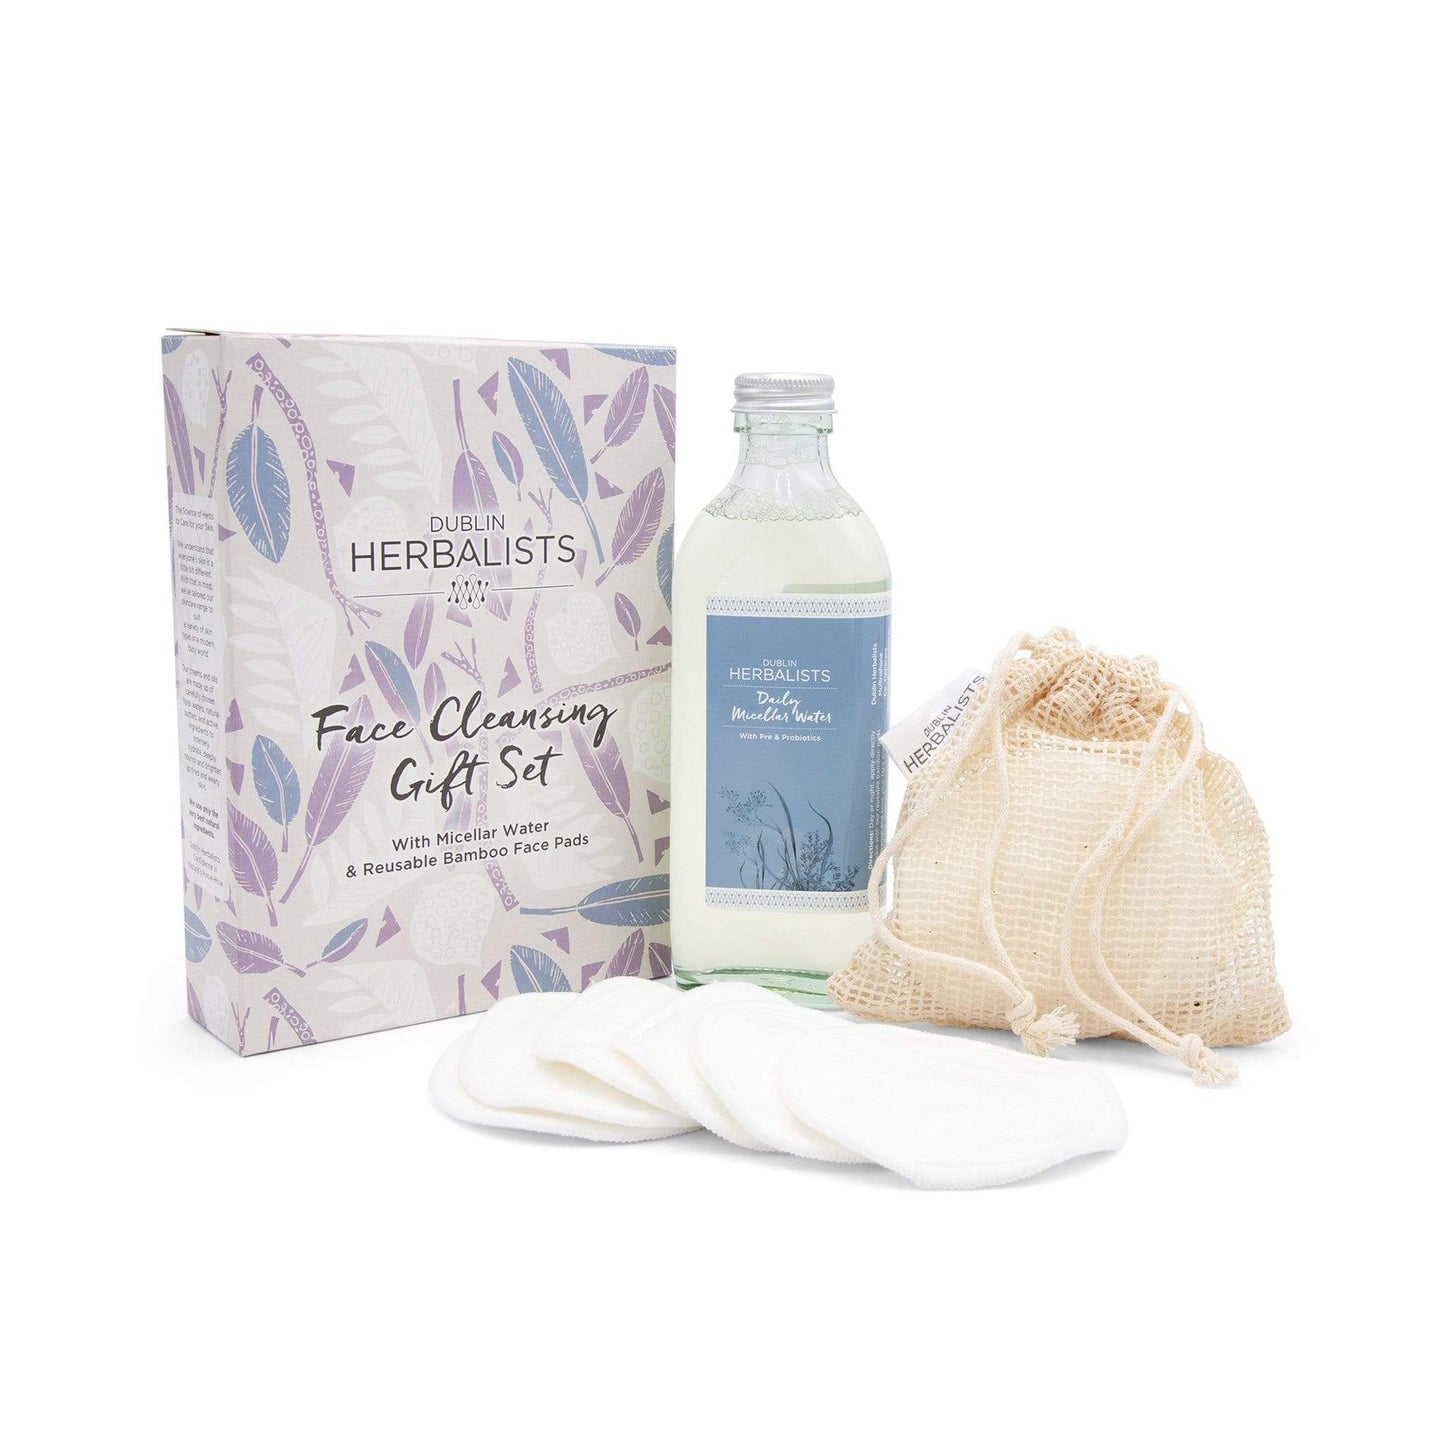 Dublin Herbalists Skincare Face Cleansing Gift Set with Micellar Water & Reusable Bamboo Face Pads - Dublin Herbalists